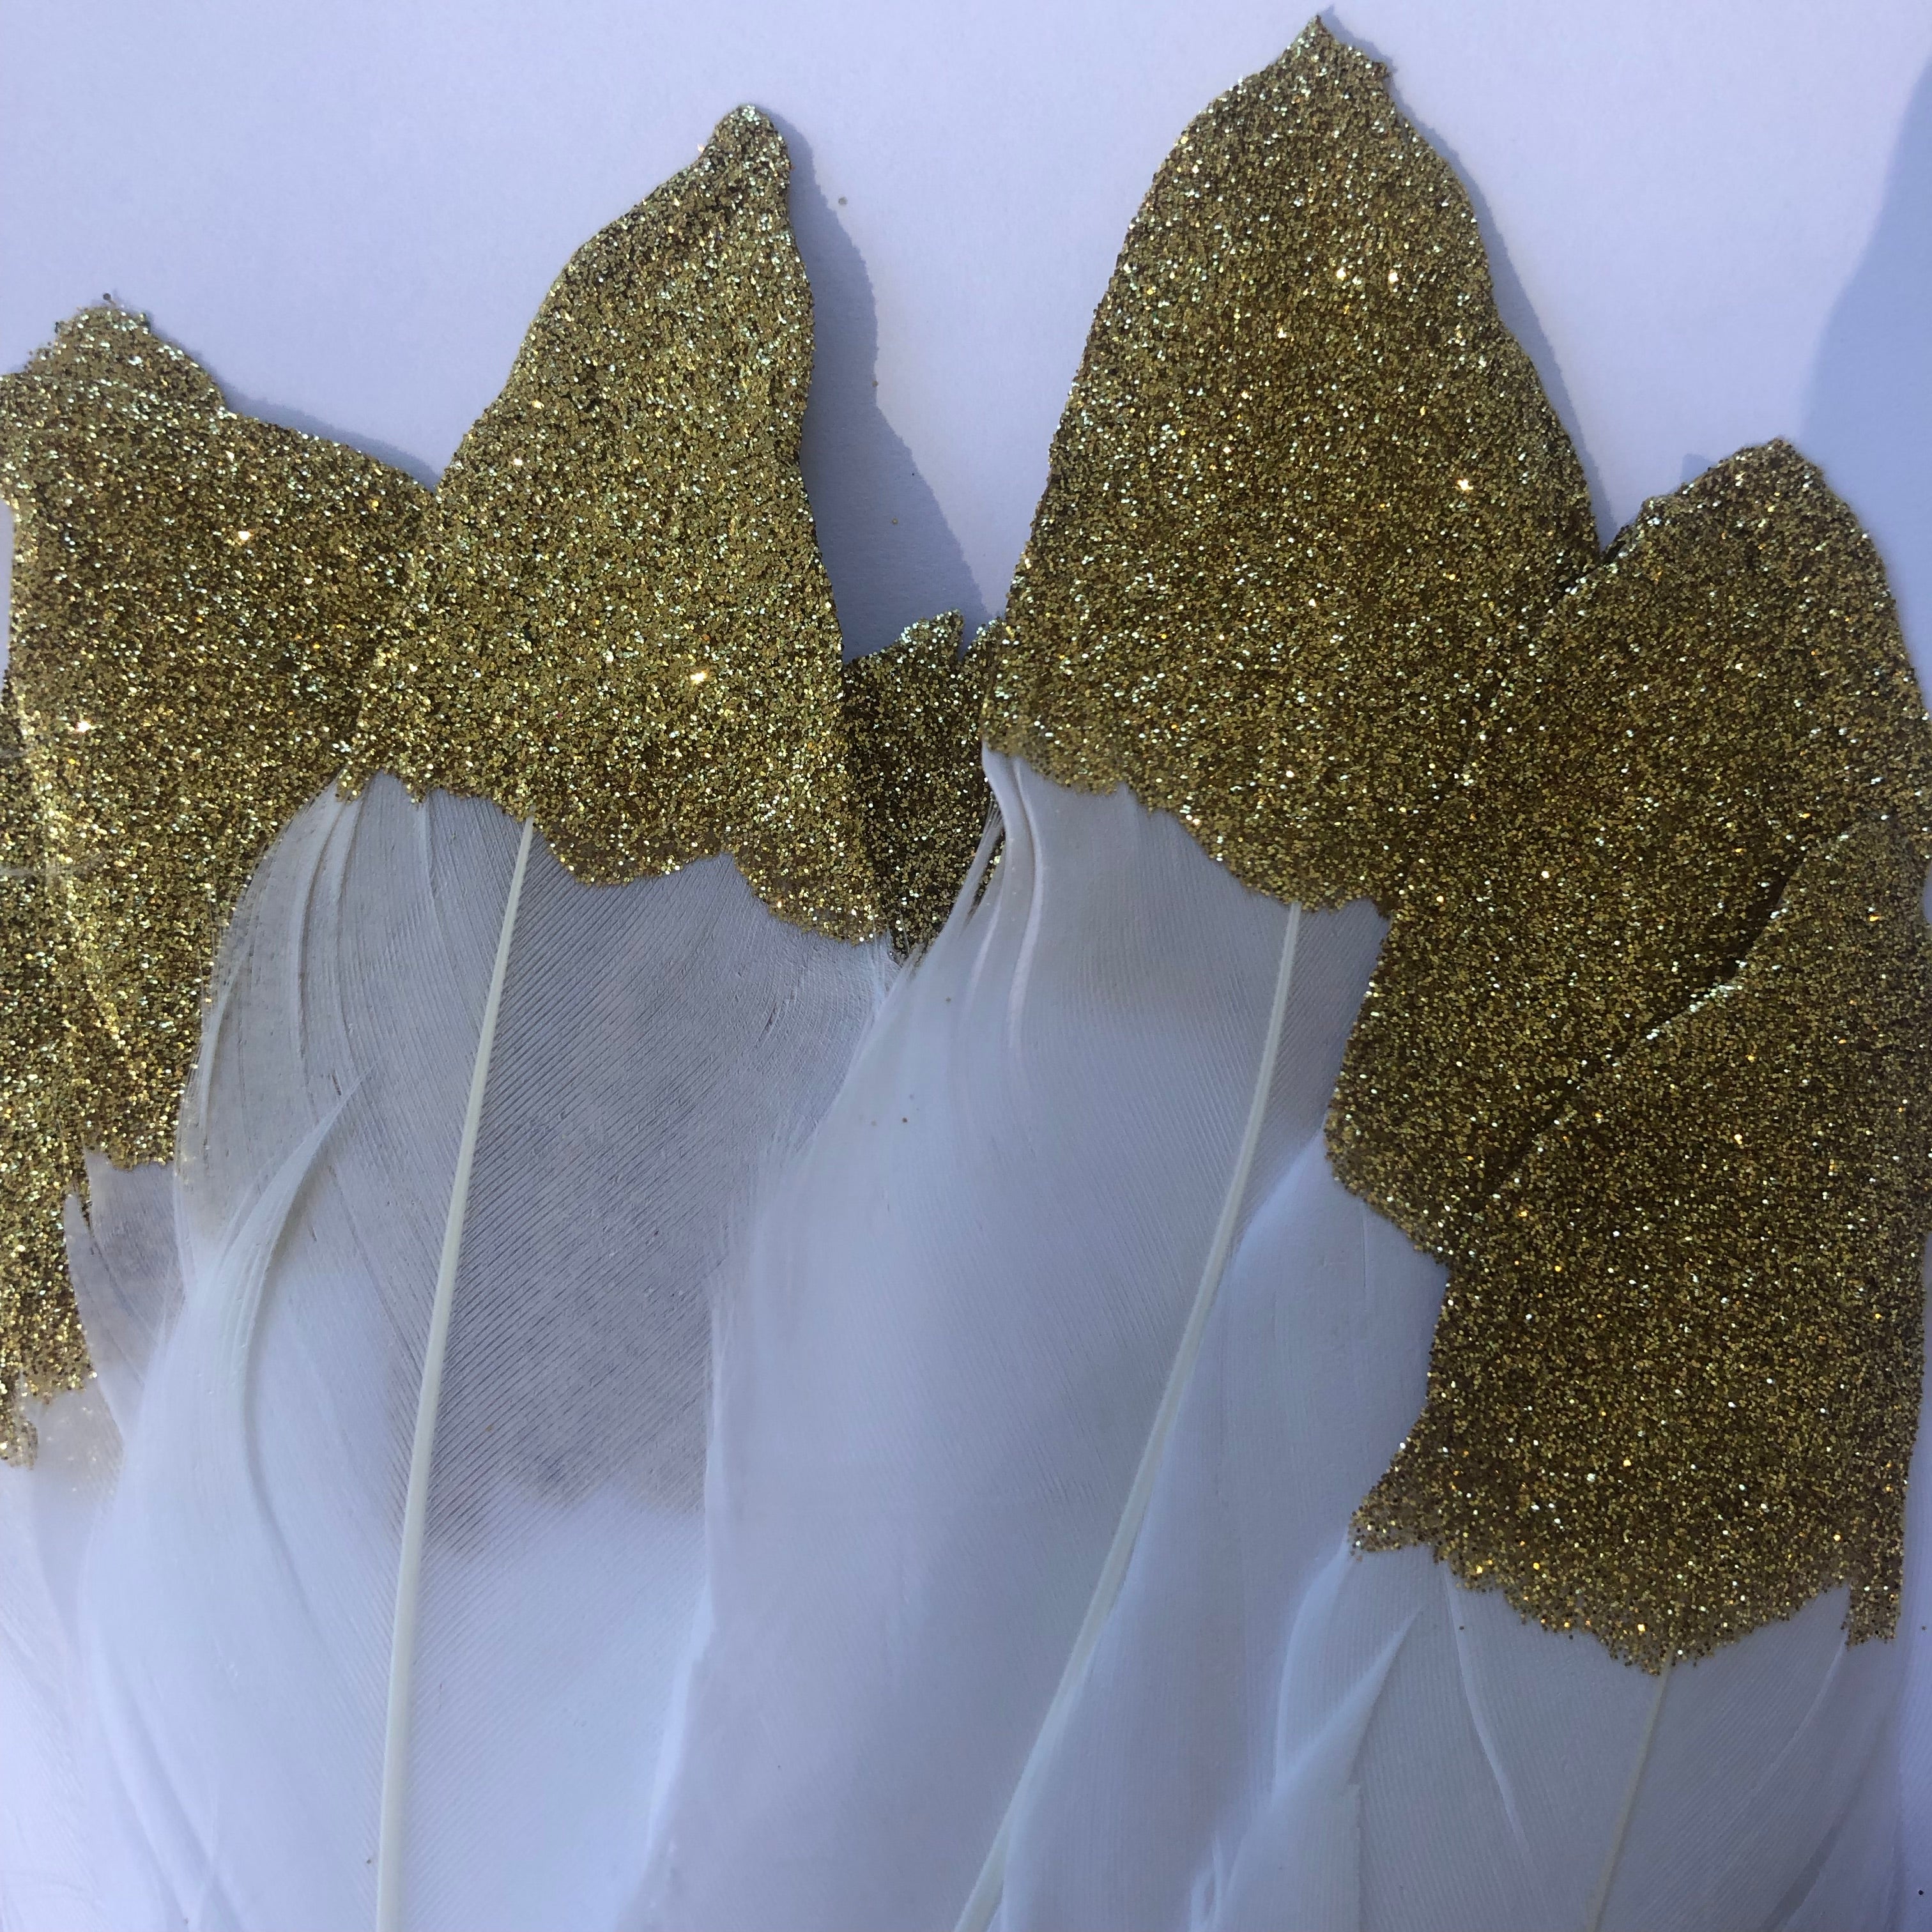 Feather Garland Wall Hanging Bunting - White Feather / Gold Glitter